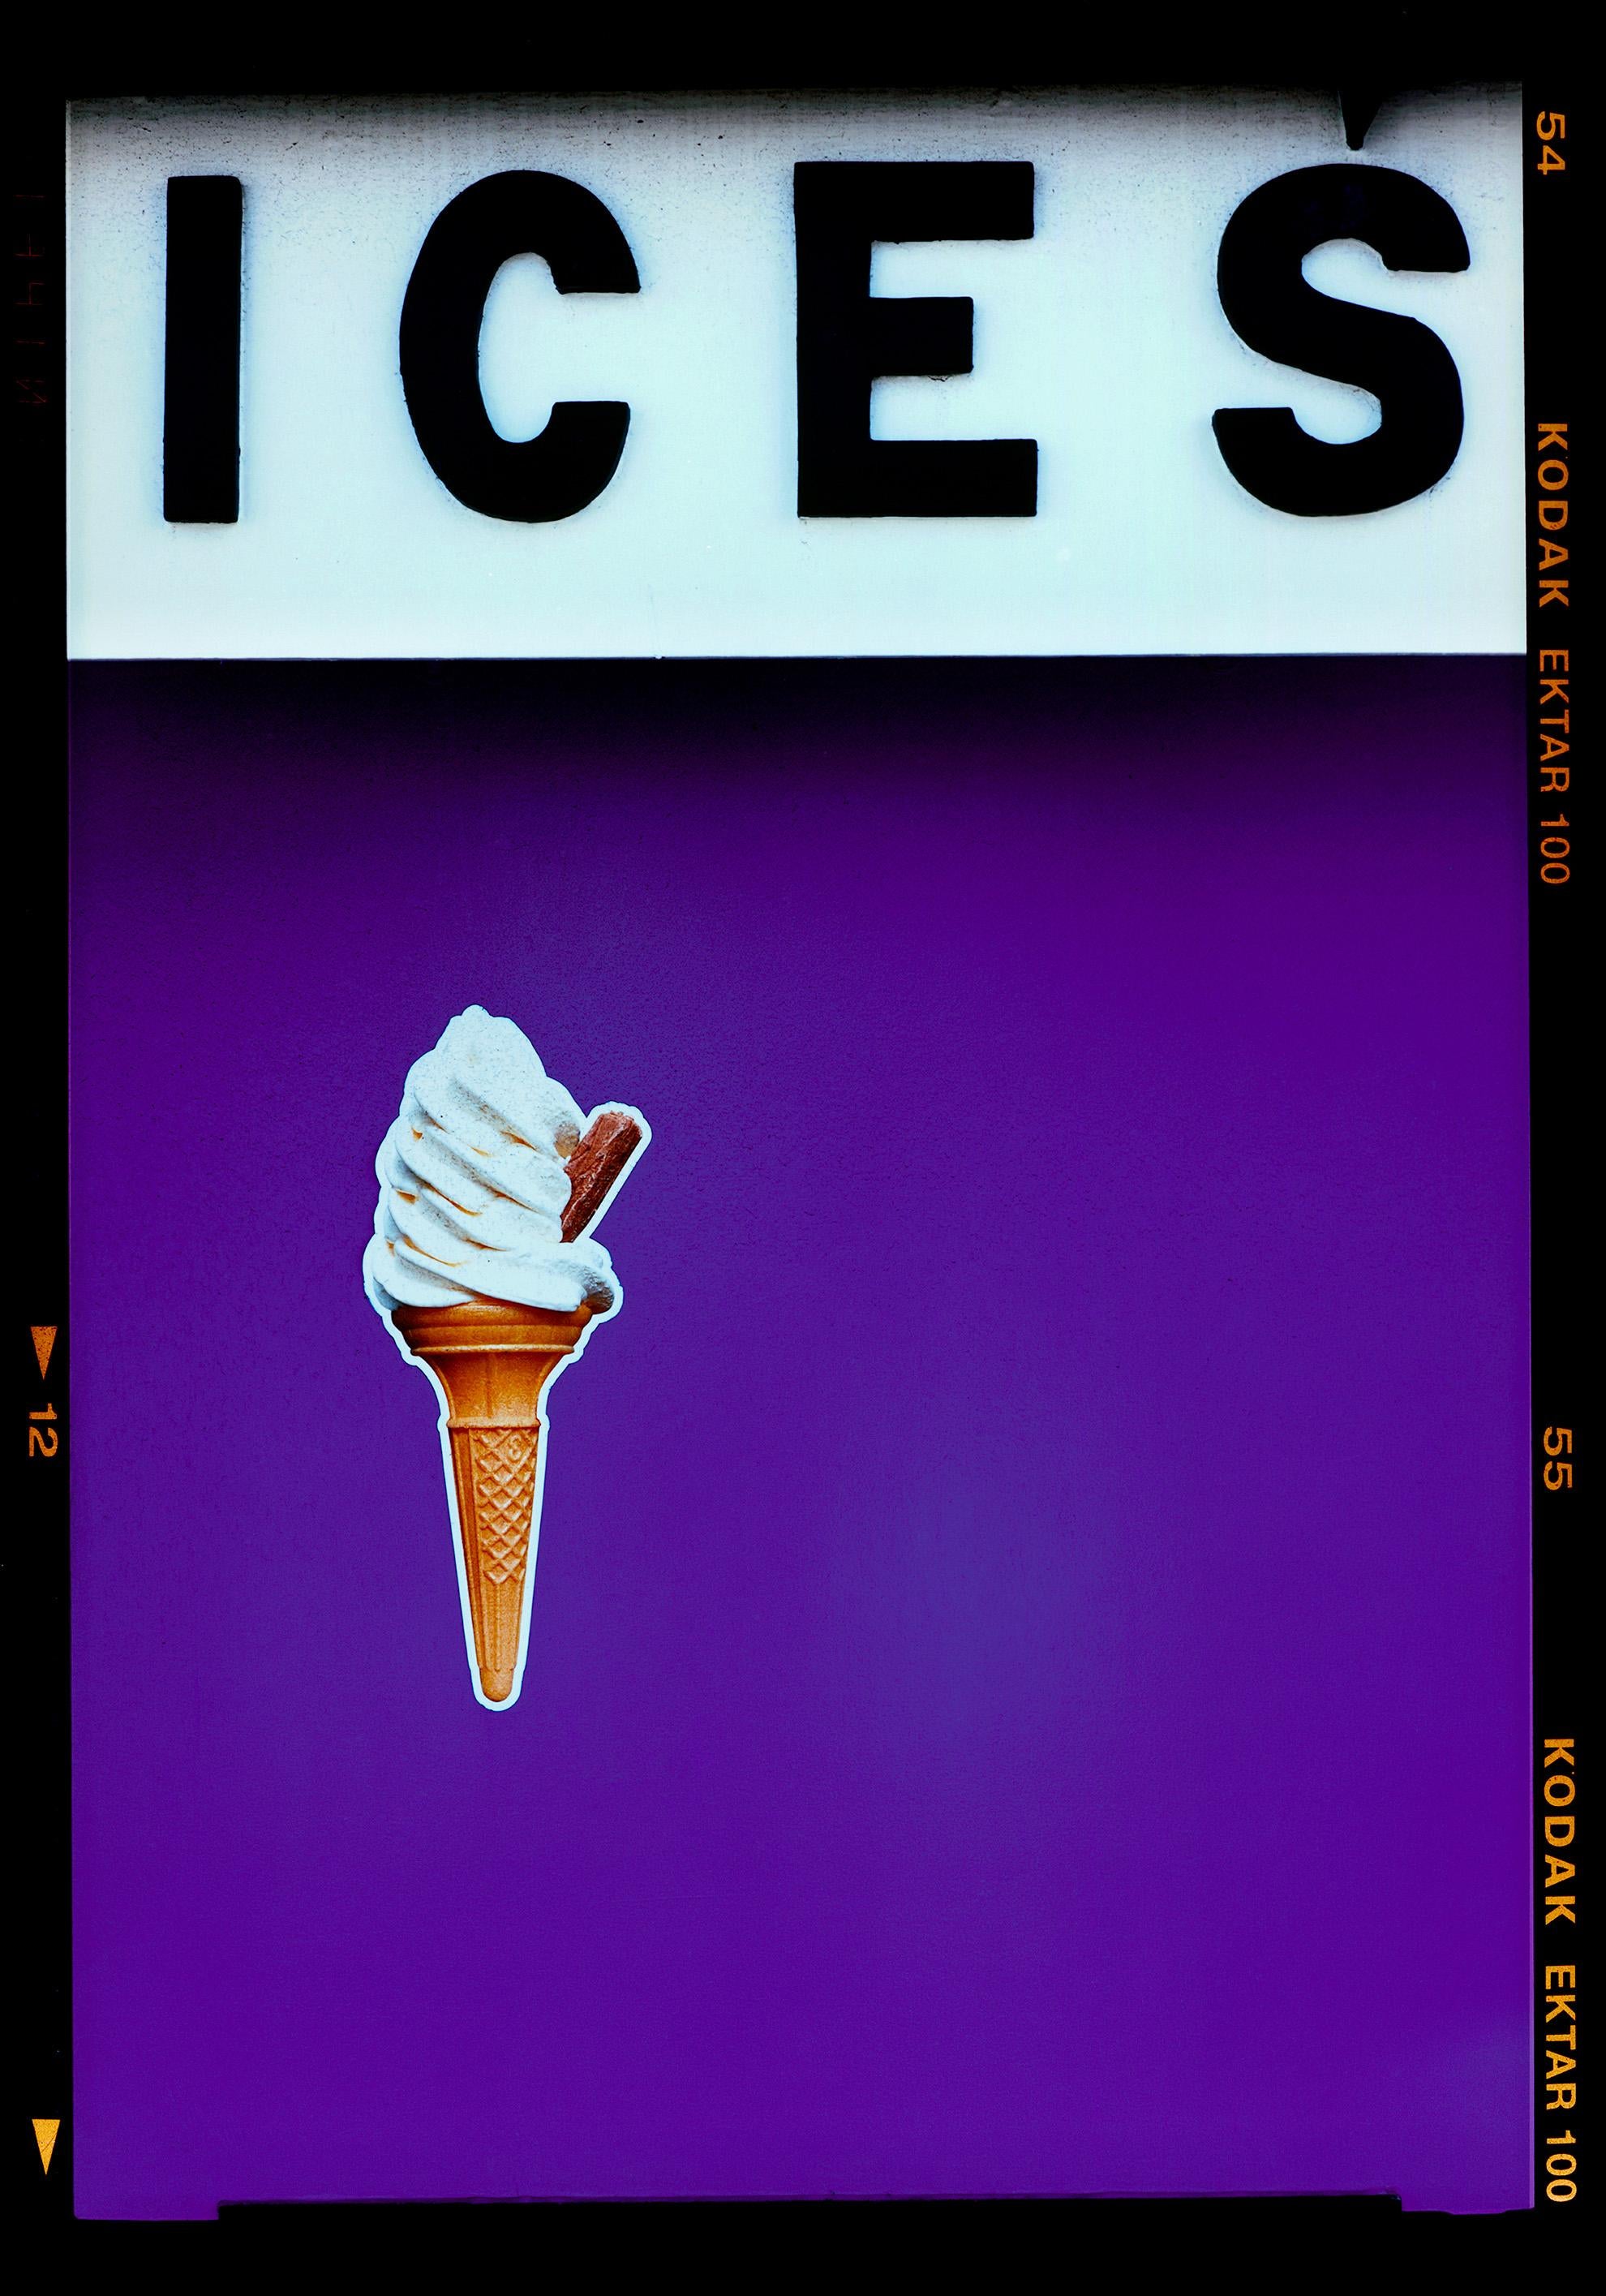 Richard Heeps Color Photograph – Ices (Purple), Bexhill-on-Sea – Farbfotografie am Meer